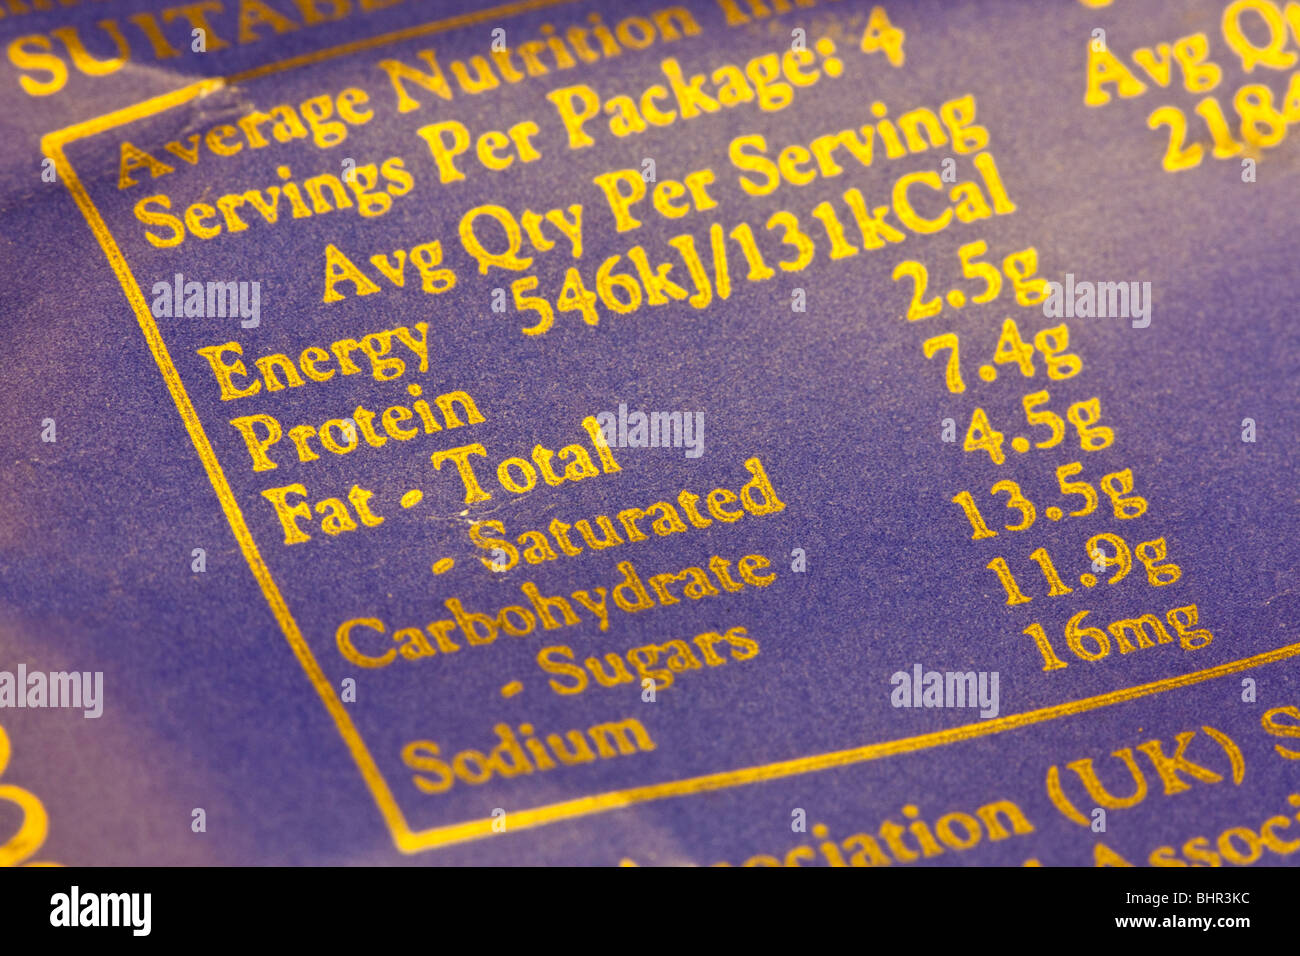 Chocolate Nutritional Information label. Stock Photo